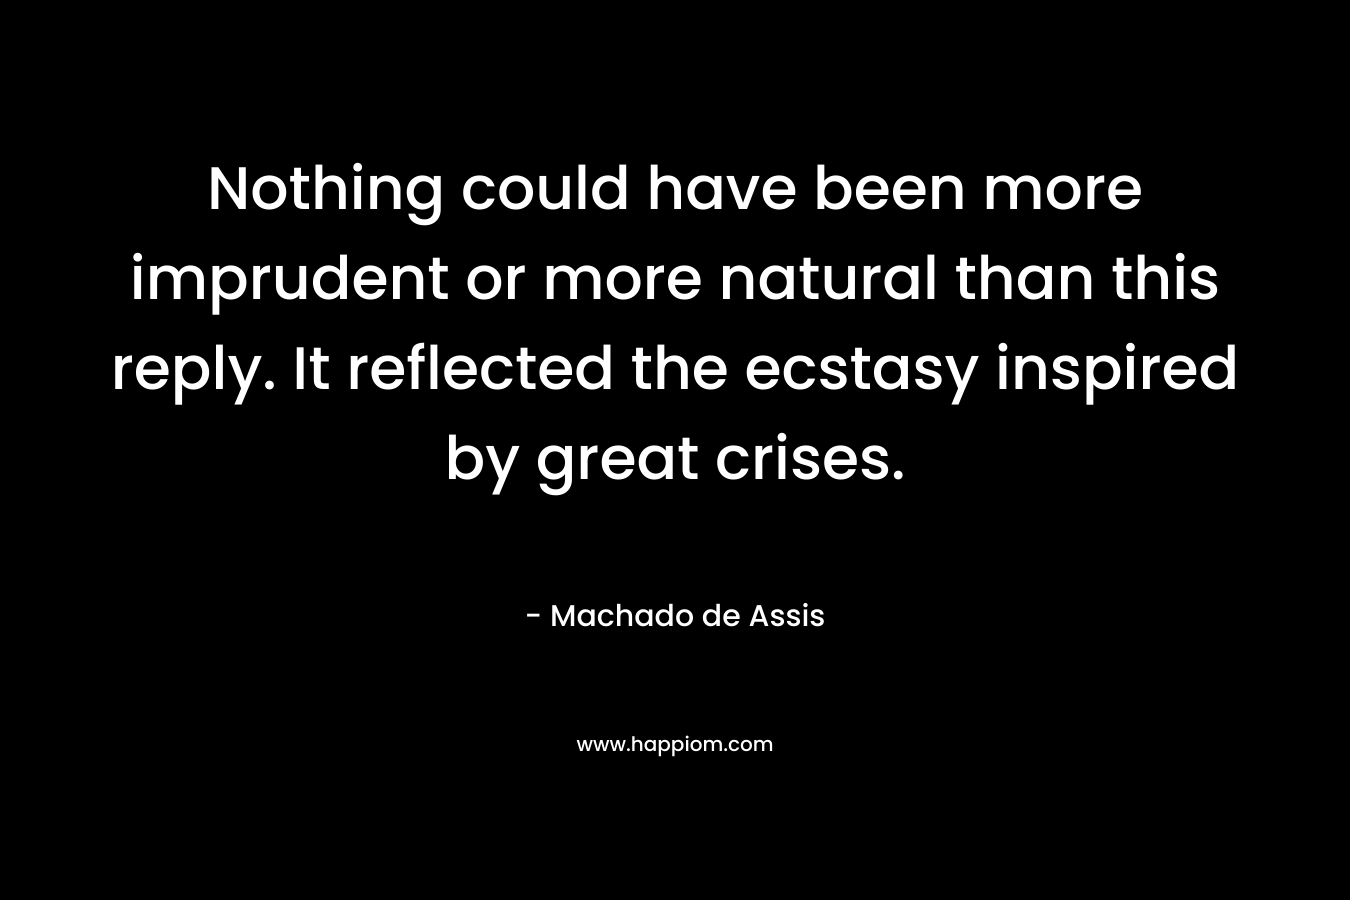 Nothing could have been more imprudent or more natural than this reply. It reflected the ecstasy inspired by great crises. – Machado de Assis